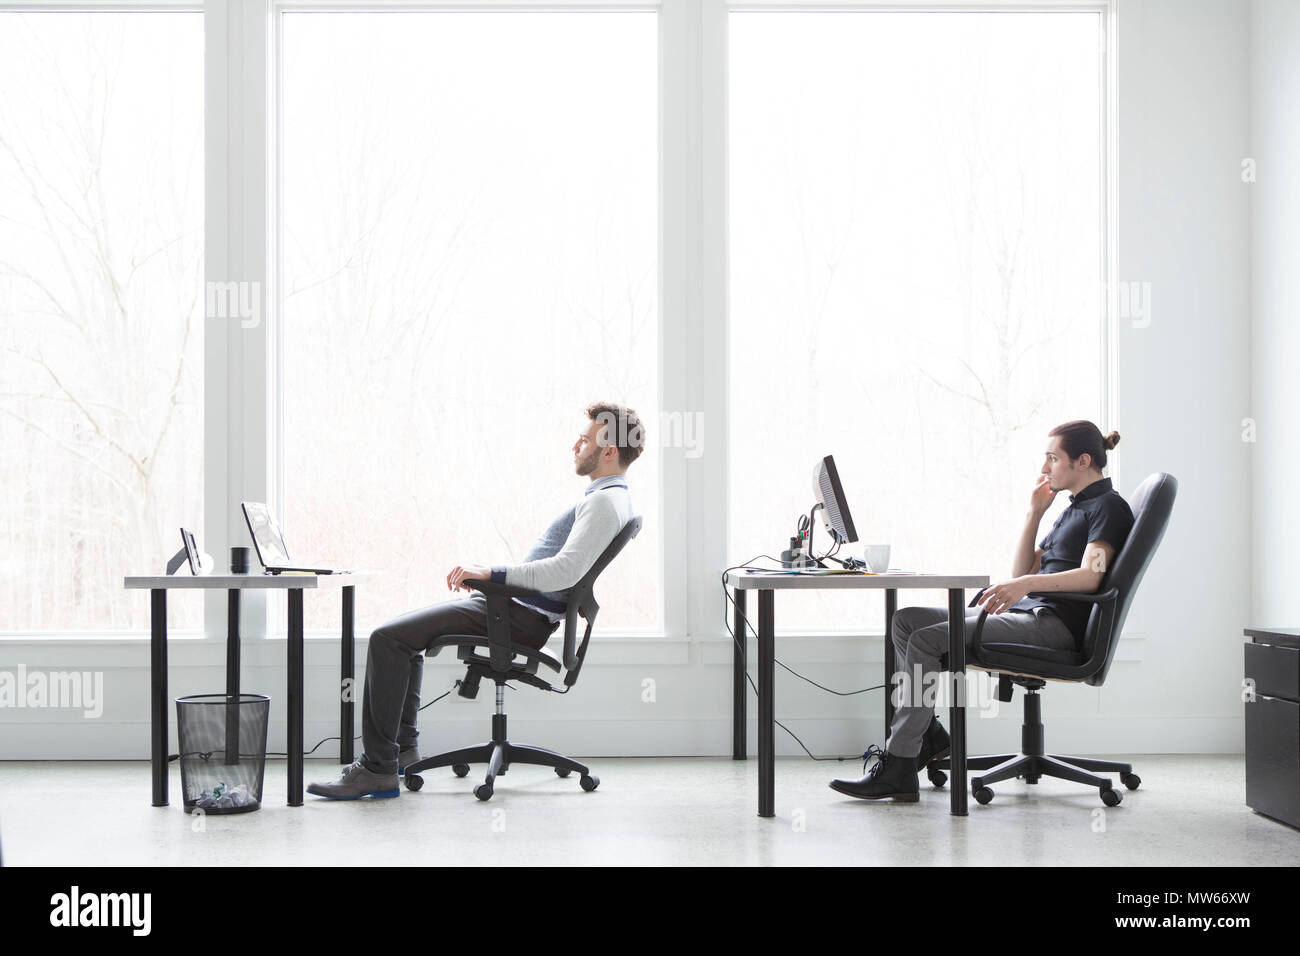 Office workers looking bored and unmotivated in a modern office space. Stock Photo